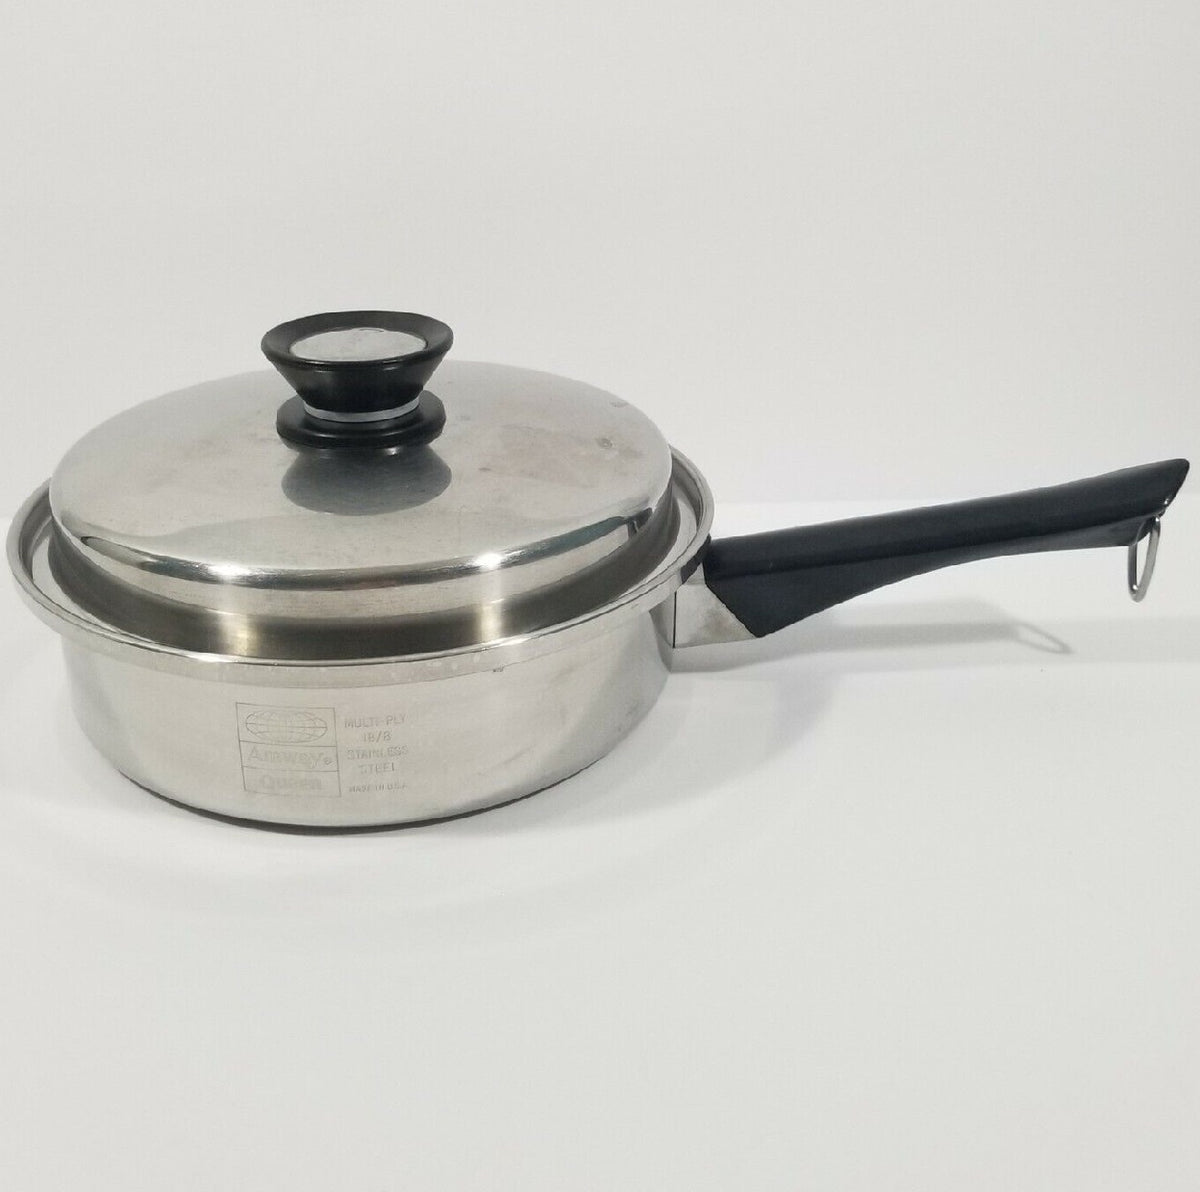 http://healthcraft.com/cdn/shop/products/amway-queen-multi-ply-large-saute-skillet-with-lid_84b19c17-943f-4694-95b0-1c7d720de22f_1200x1200.jpg?v=1680643739